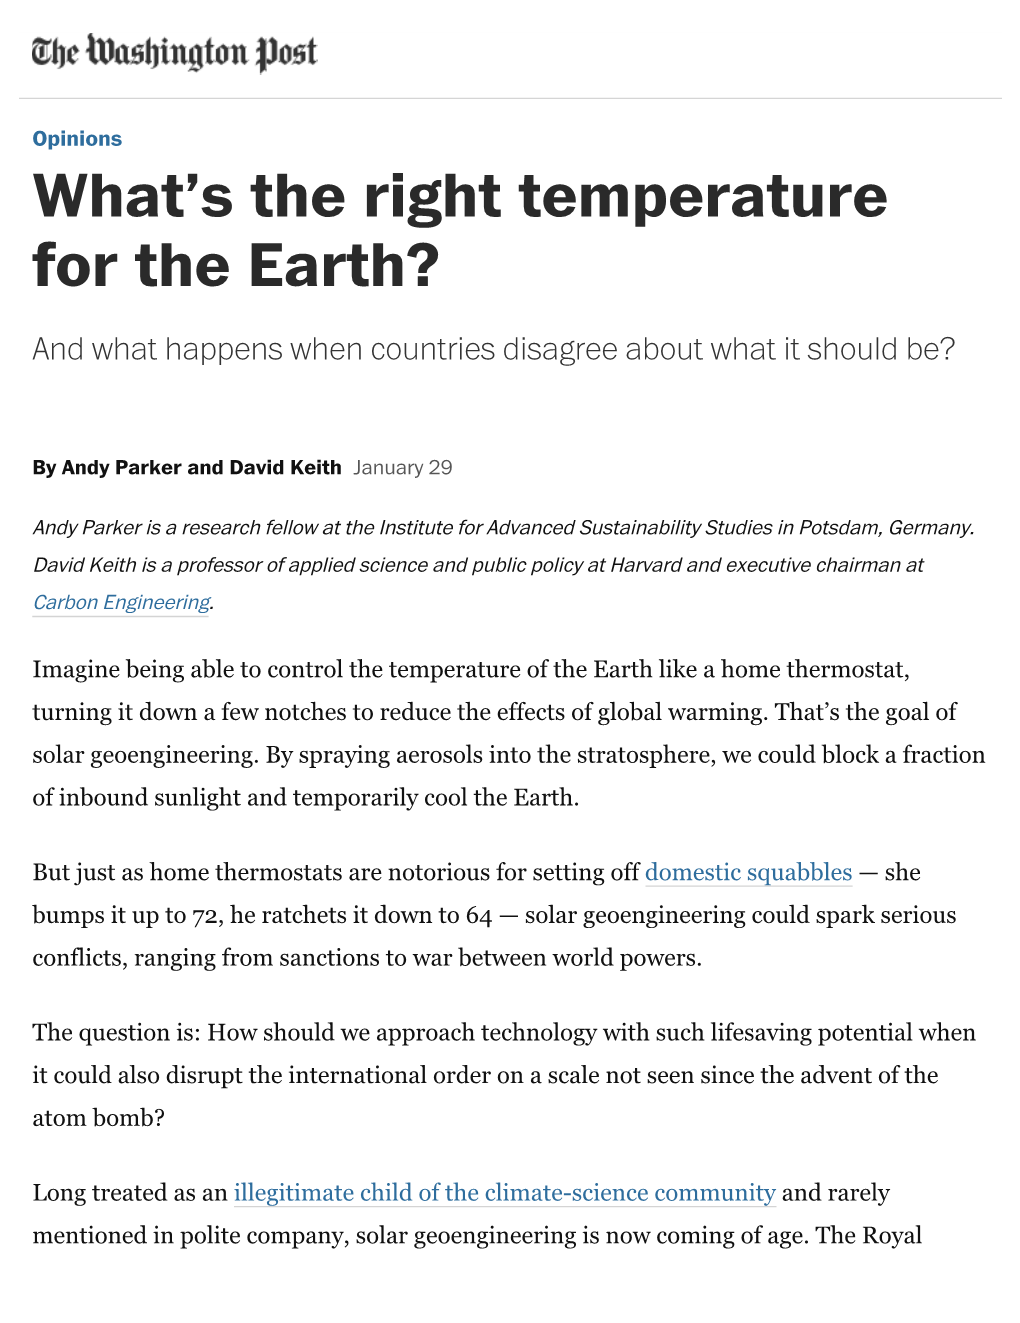 What's the Right Temperature for the Earth?